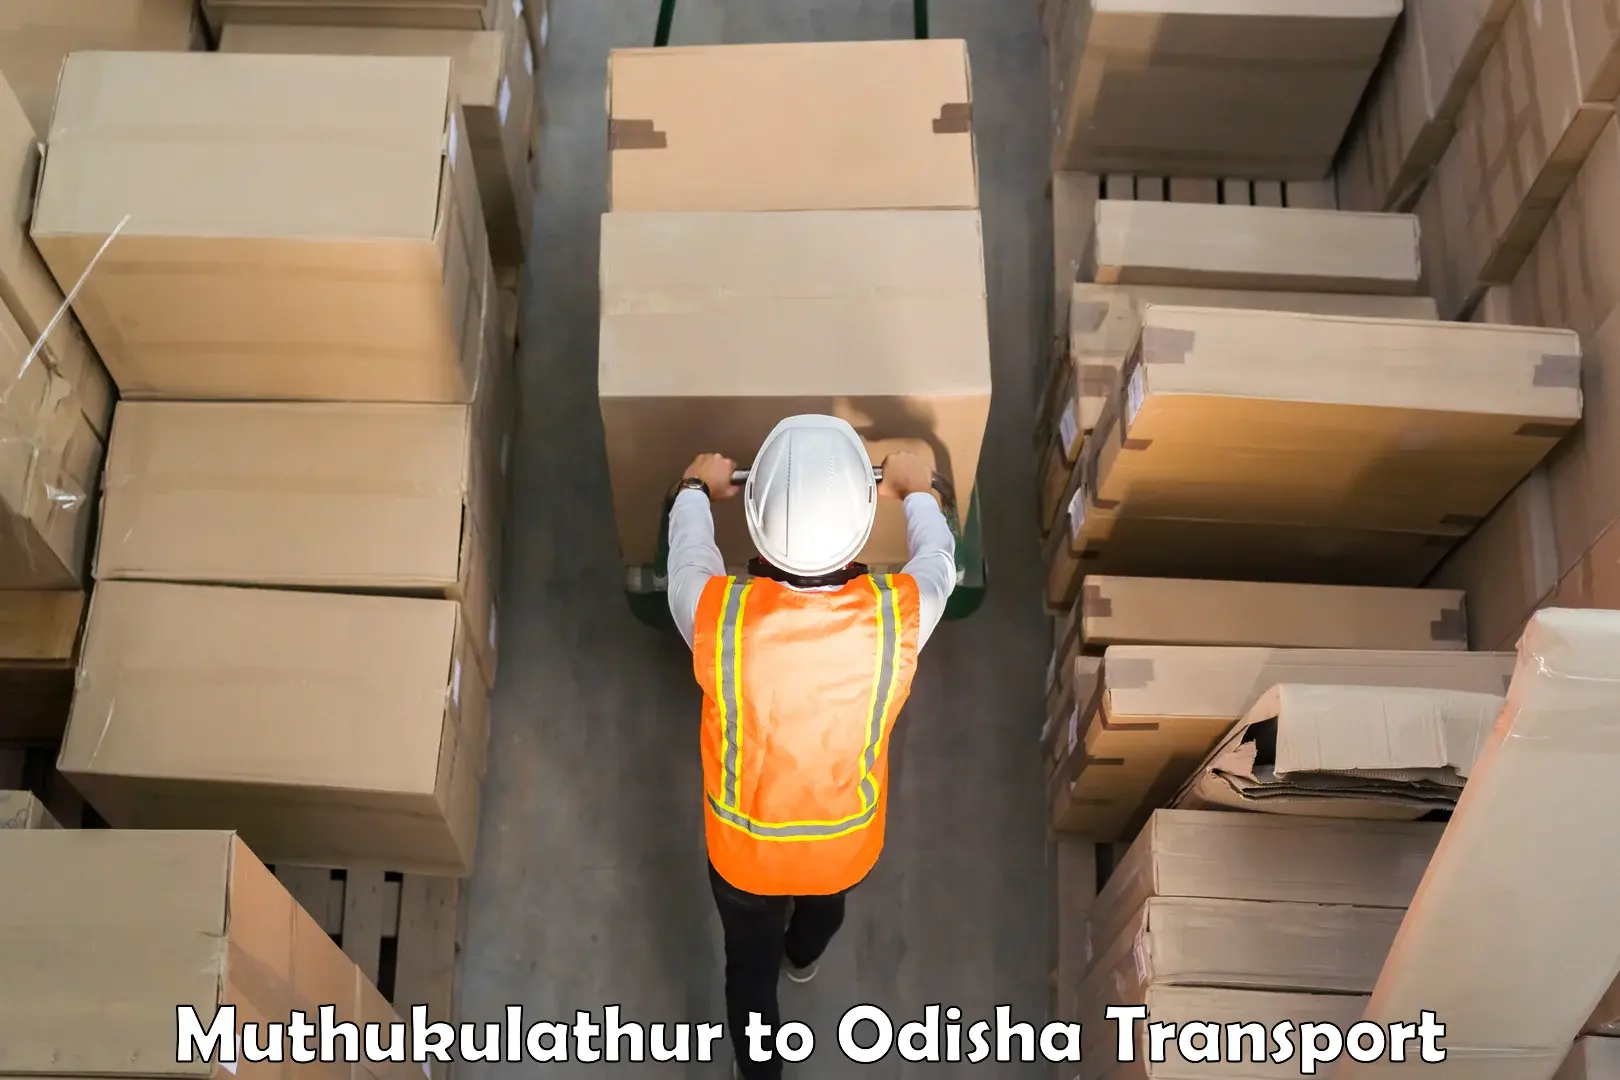 Part load transport service in India Muthukulathur to Talcher